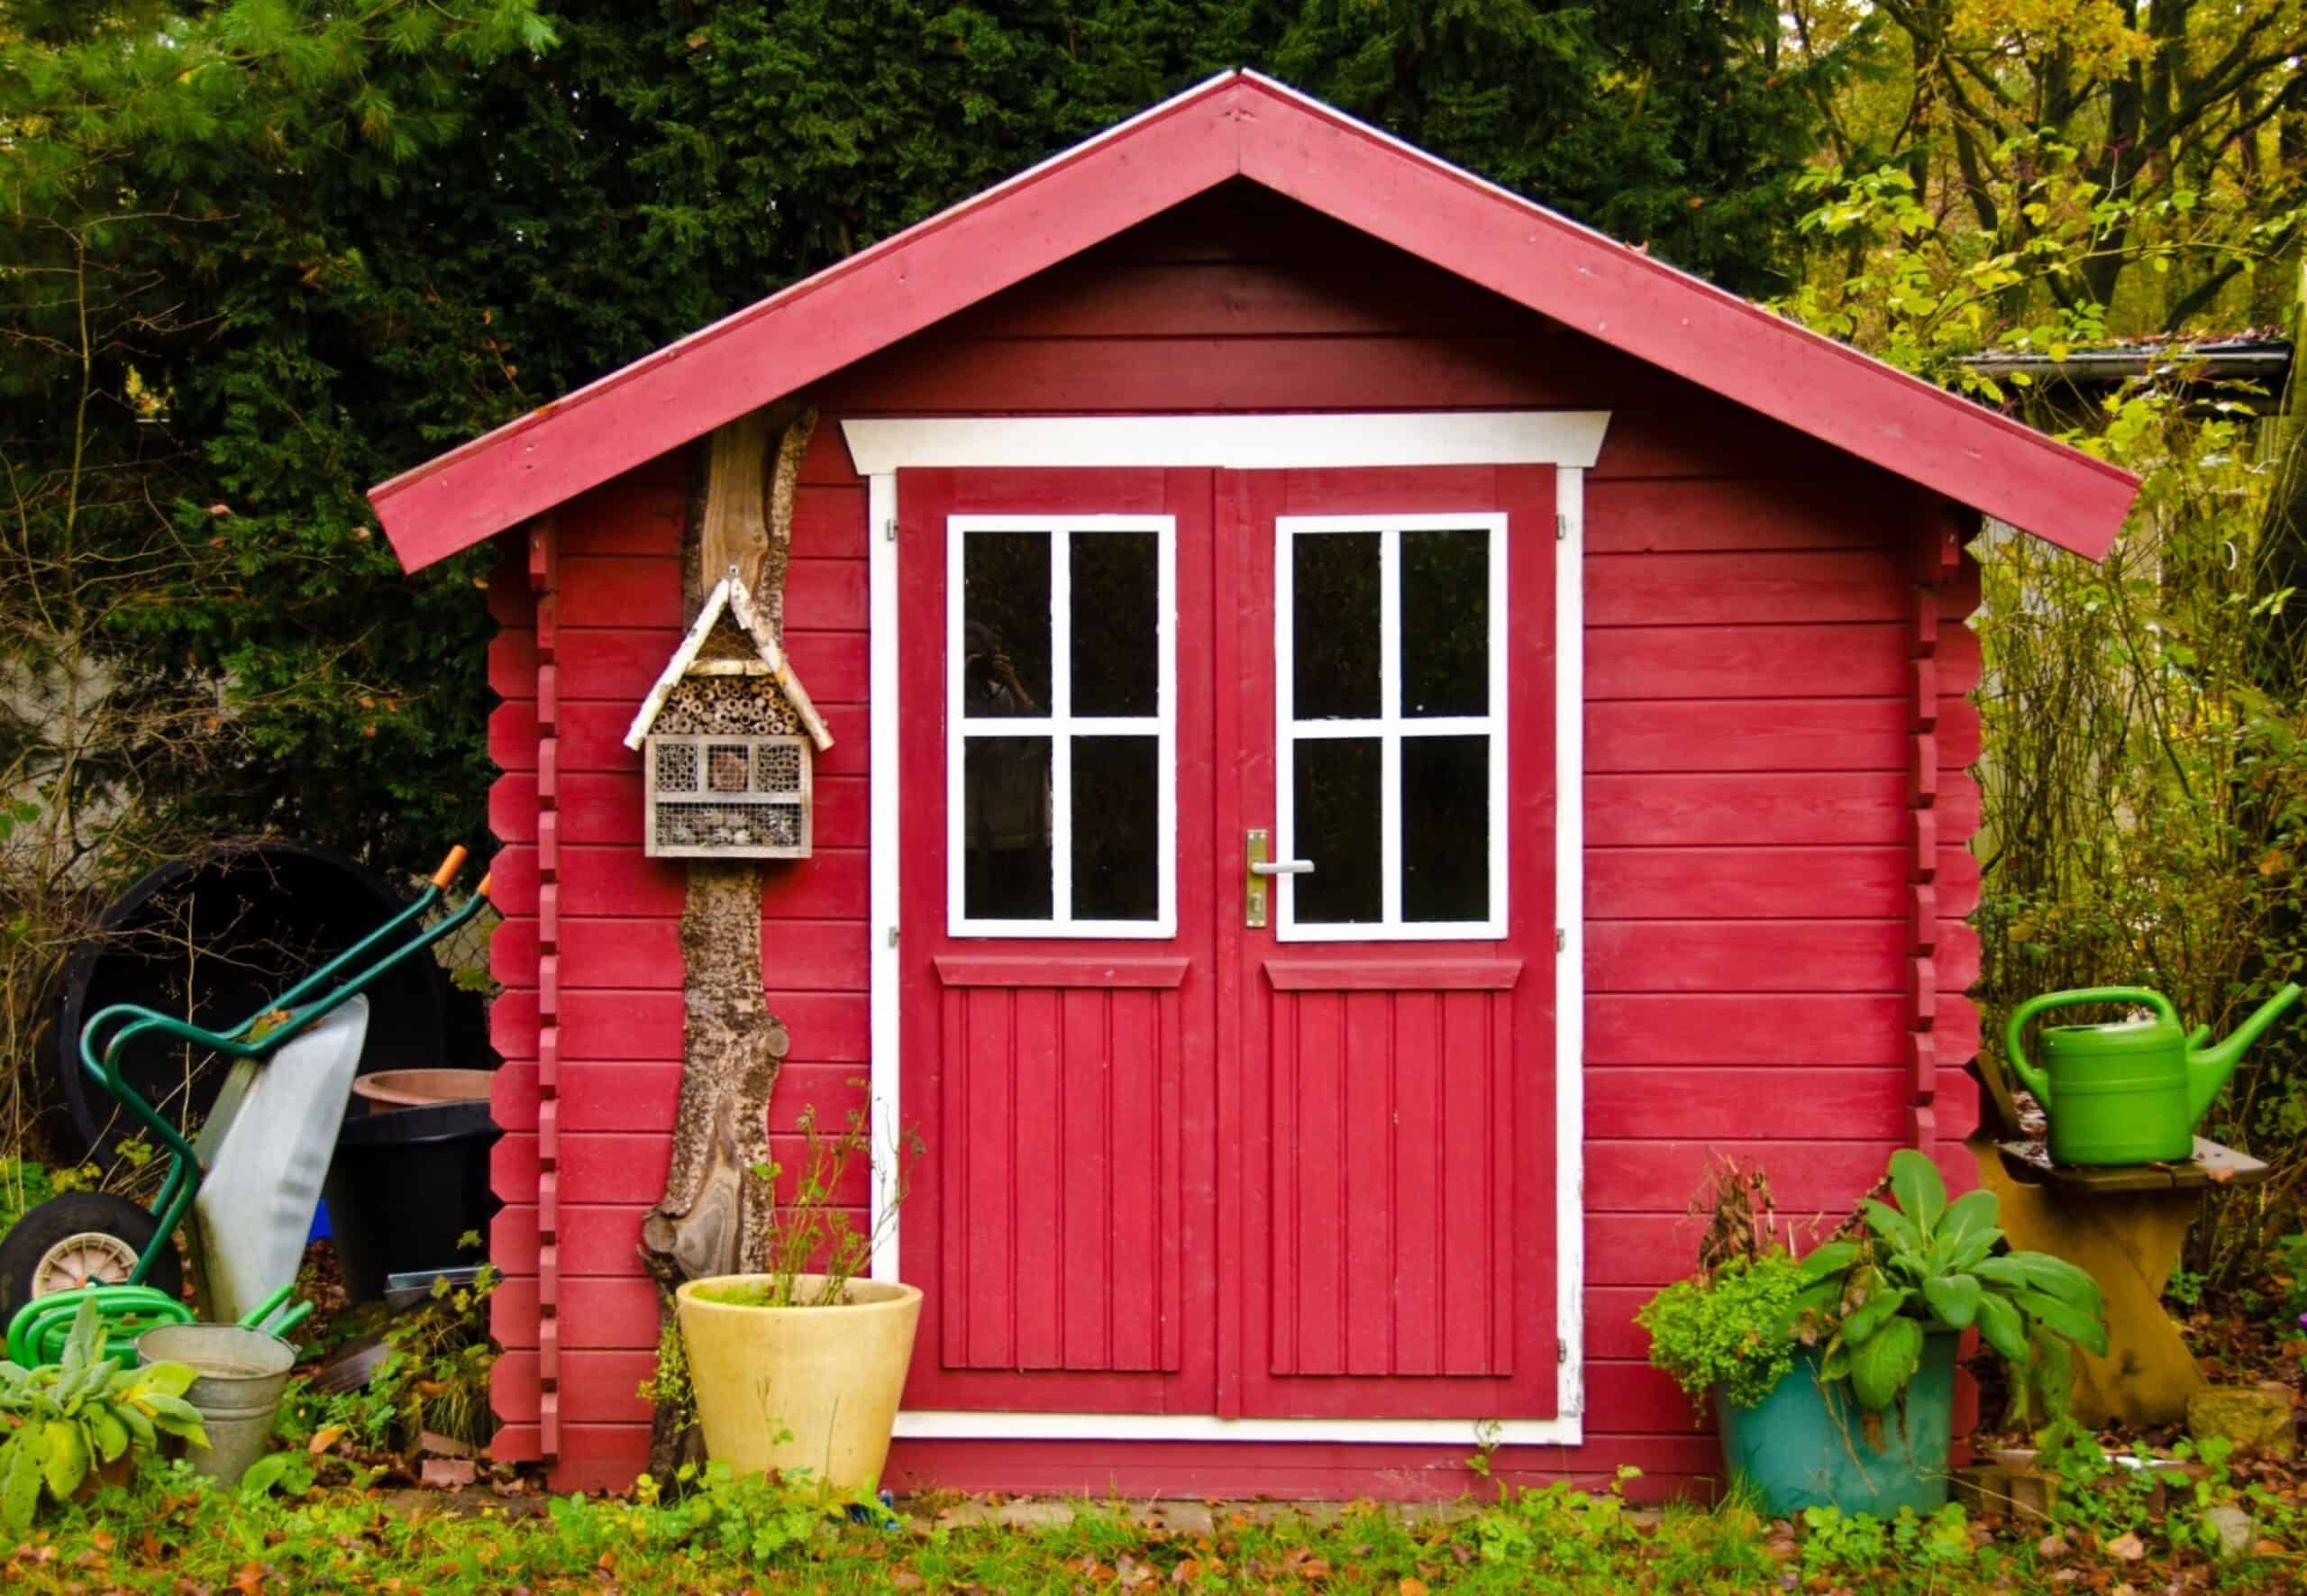 A light red small shed, gardenhouse, with some garden tools around it